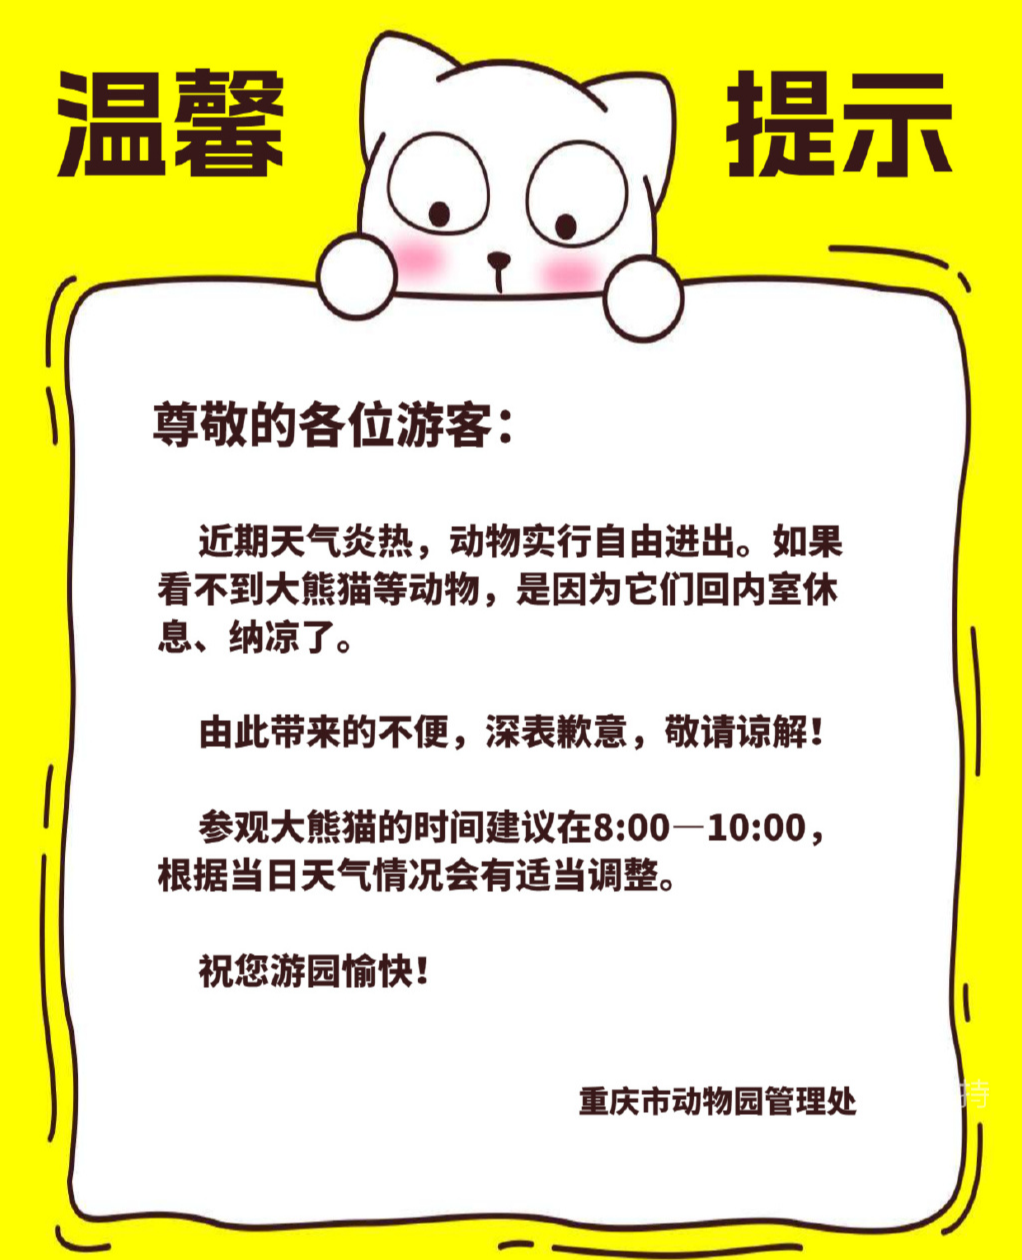 The notice released by Chongqing Zoo. (Photo provided by the interviewed institute) 